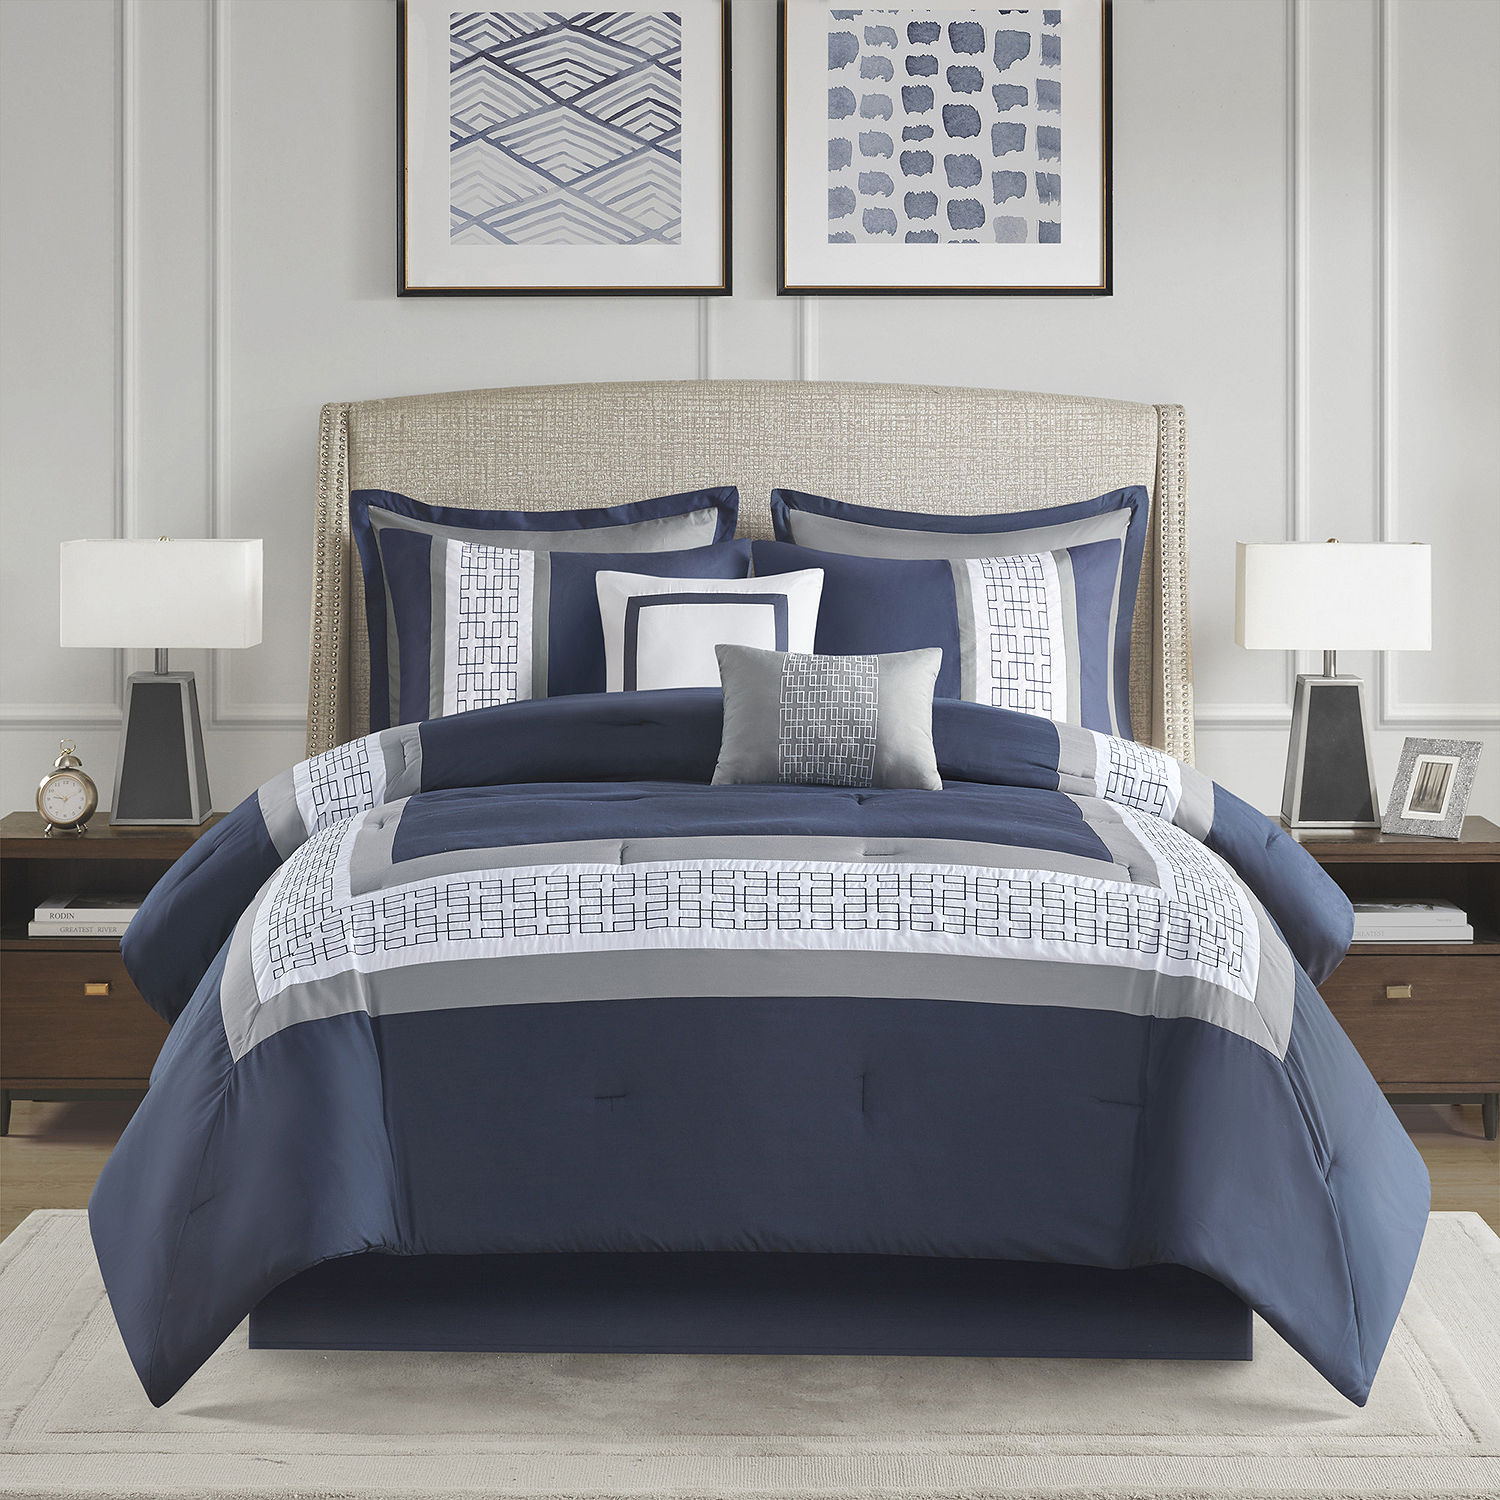 510 Design Kingwood 8-pc. Midweight Embroidered Comforter Set - JCPenney